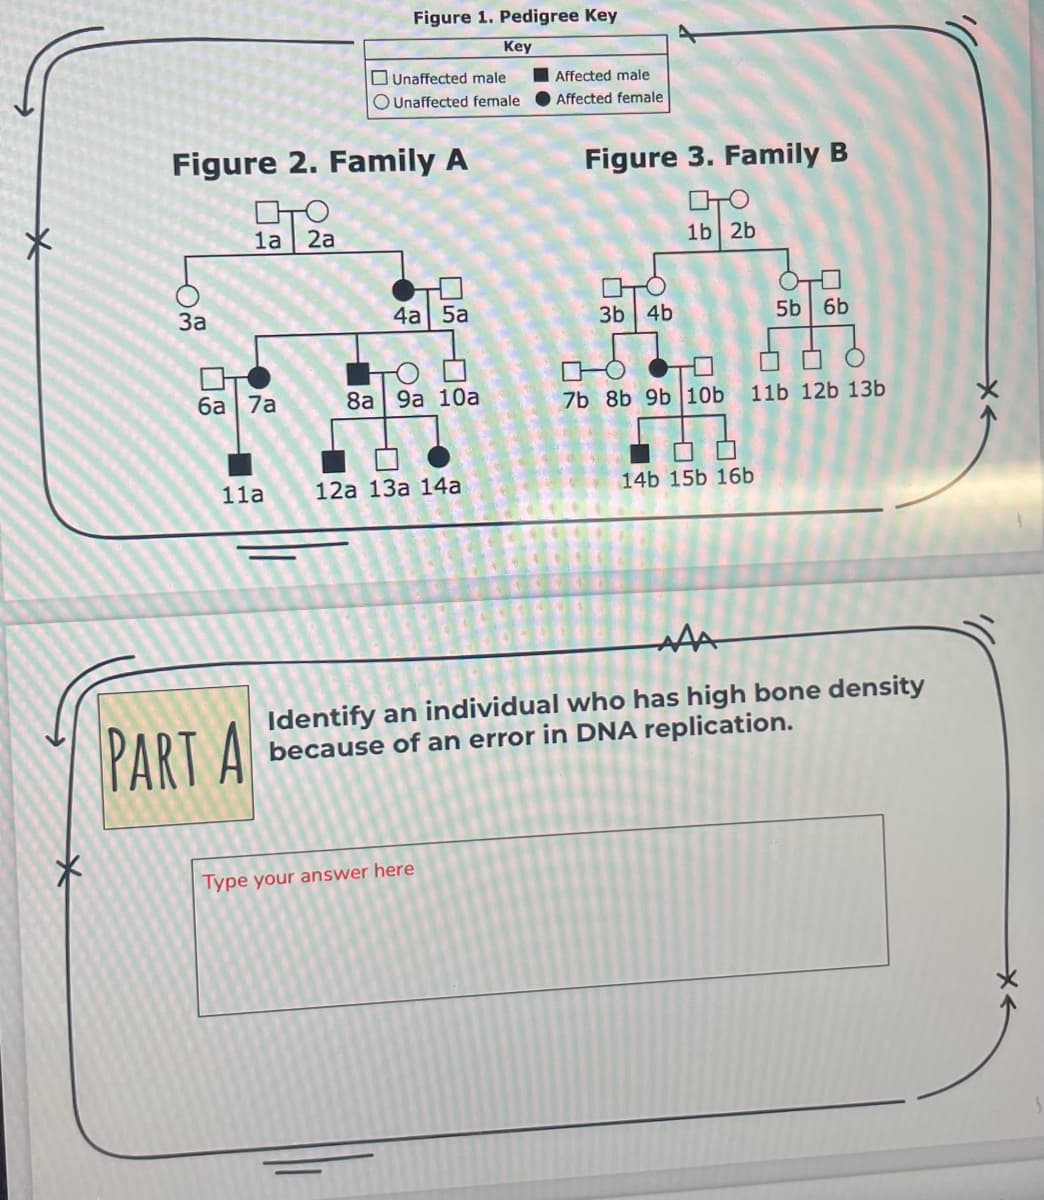 Figure 1. Pedigree Key
Key
Figure 2. Family A
вто
1a 2a
3a
4a 5a
8a 9a 10a
08
Unaffected male
OUnaffected female
PART A
Figure 3. Family B
TO
1b 2b
TO
3b 4b
5b 6b
6a 7a
7b 8b 9b 10b 11b 12b 13b
11a
12a 13a 14a
14b 15b 16b
АДА
Identify an individual who has high bone density
because of an error in DNA replication.
Affected male
Affected female
Type your answer here
18059